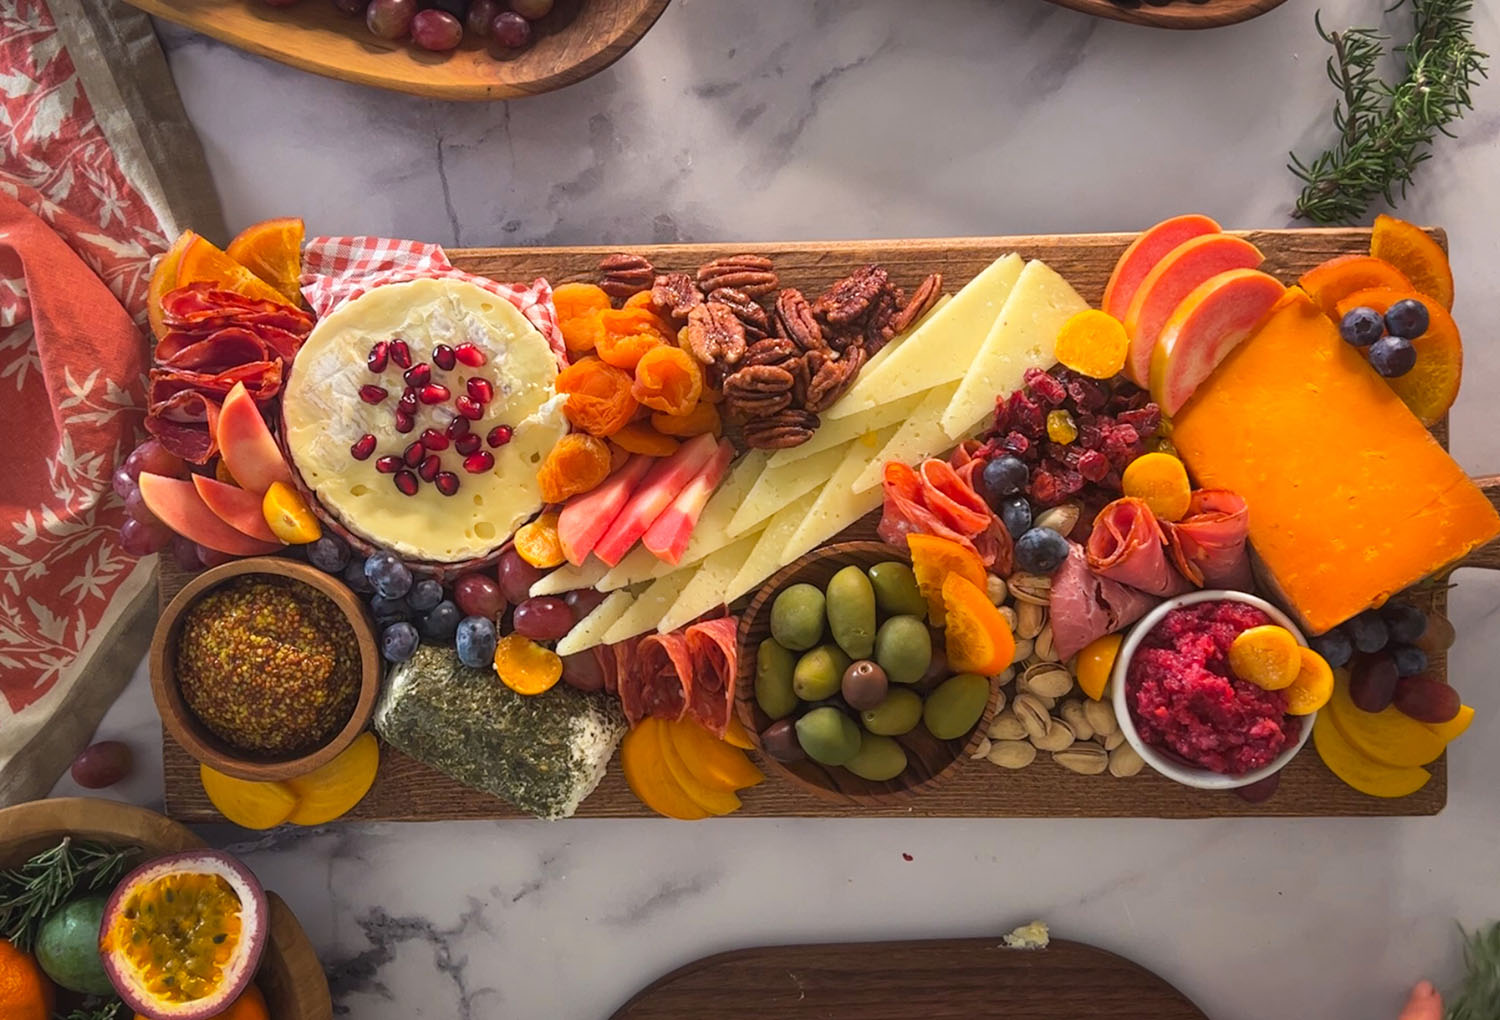 Charcuterie board with dips, olives, grapes, cheeses, folded meats, dried fruits, nuts, and fresh fruit